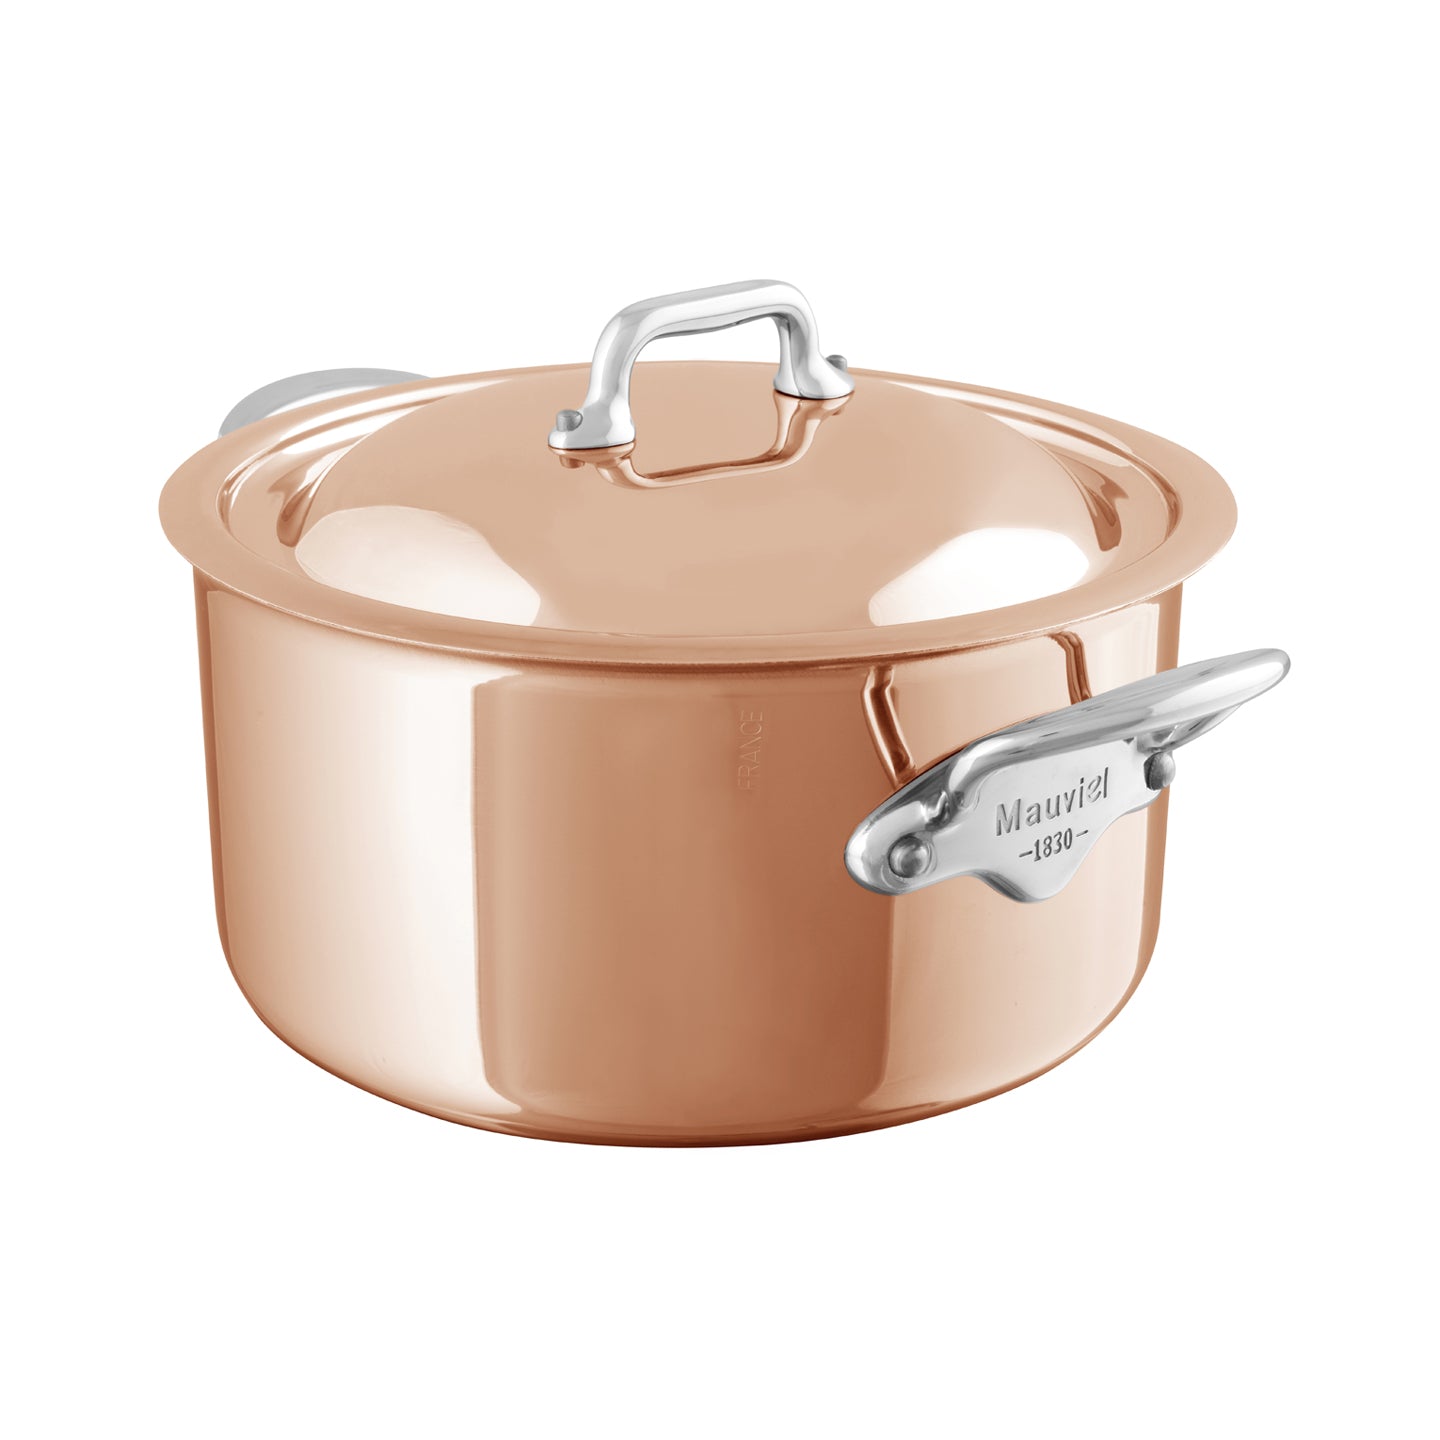 Met Lux 9 oz Copper Stainless Steel Small Individual Casserole Pot - with Lid - 5 3/4 inch x 3 1/2 inch x 2 1/2 inch - 1 Count Box